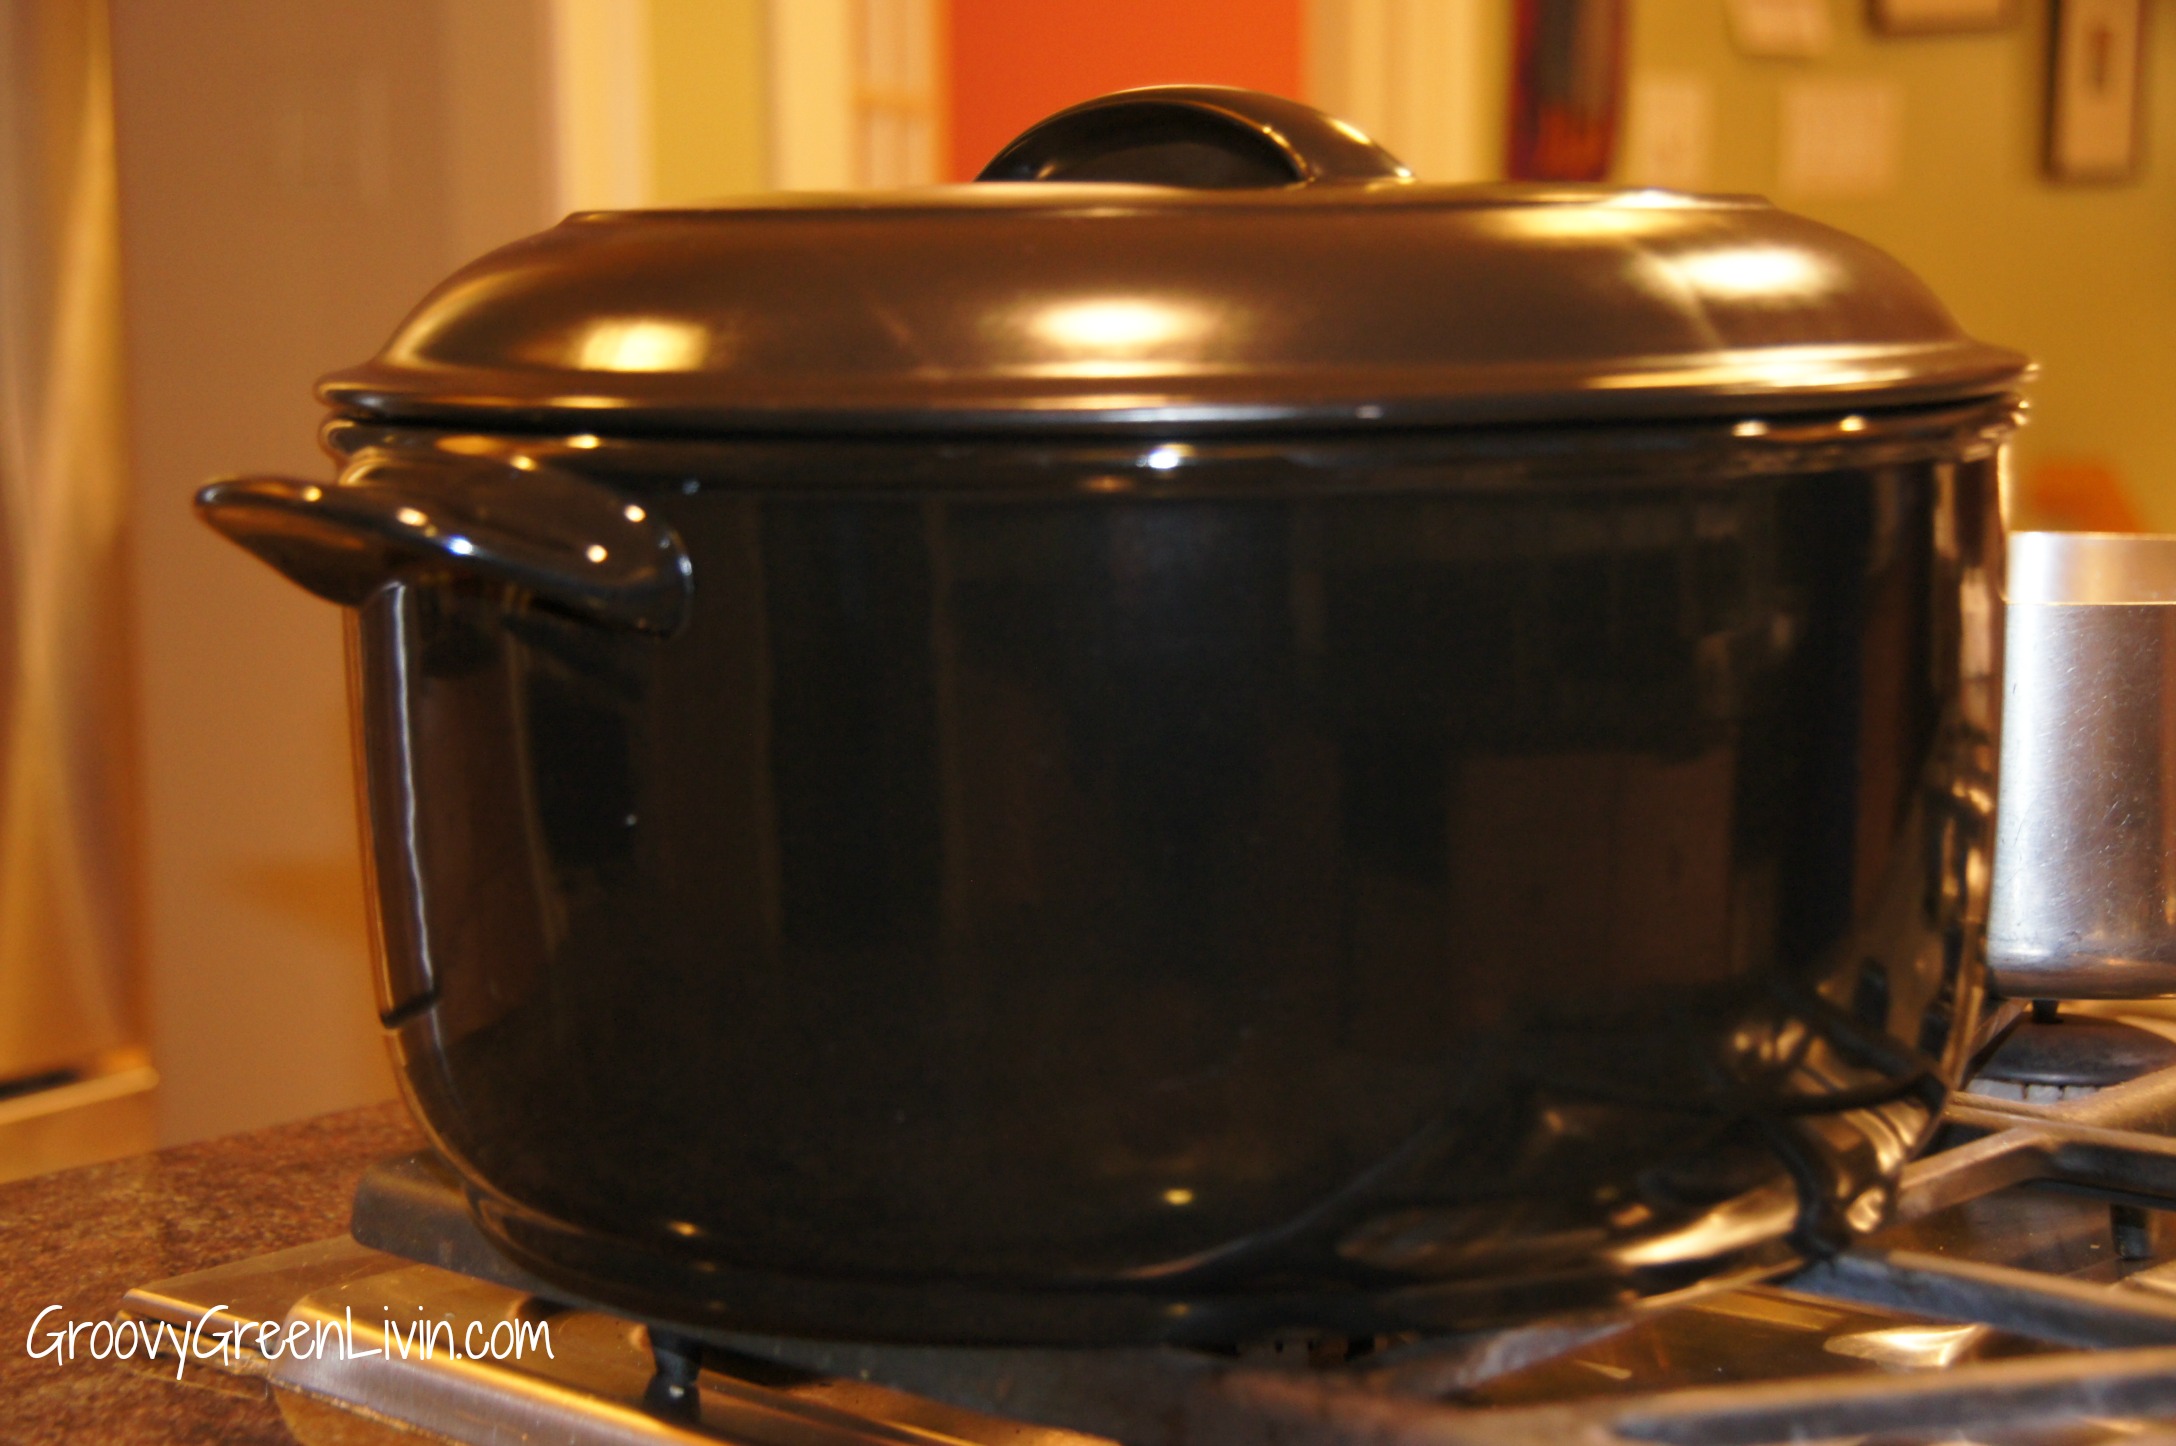 Review of Ceramic Cookware From Xtrema